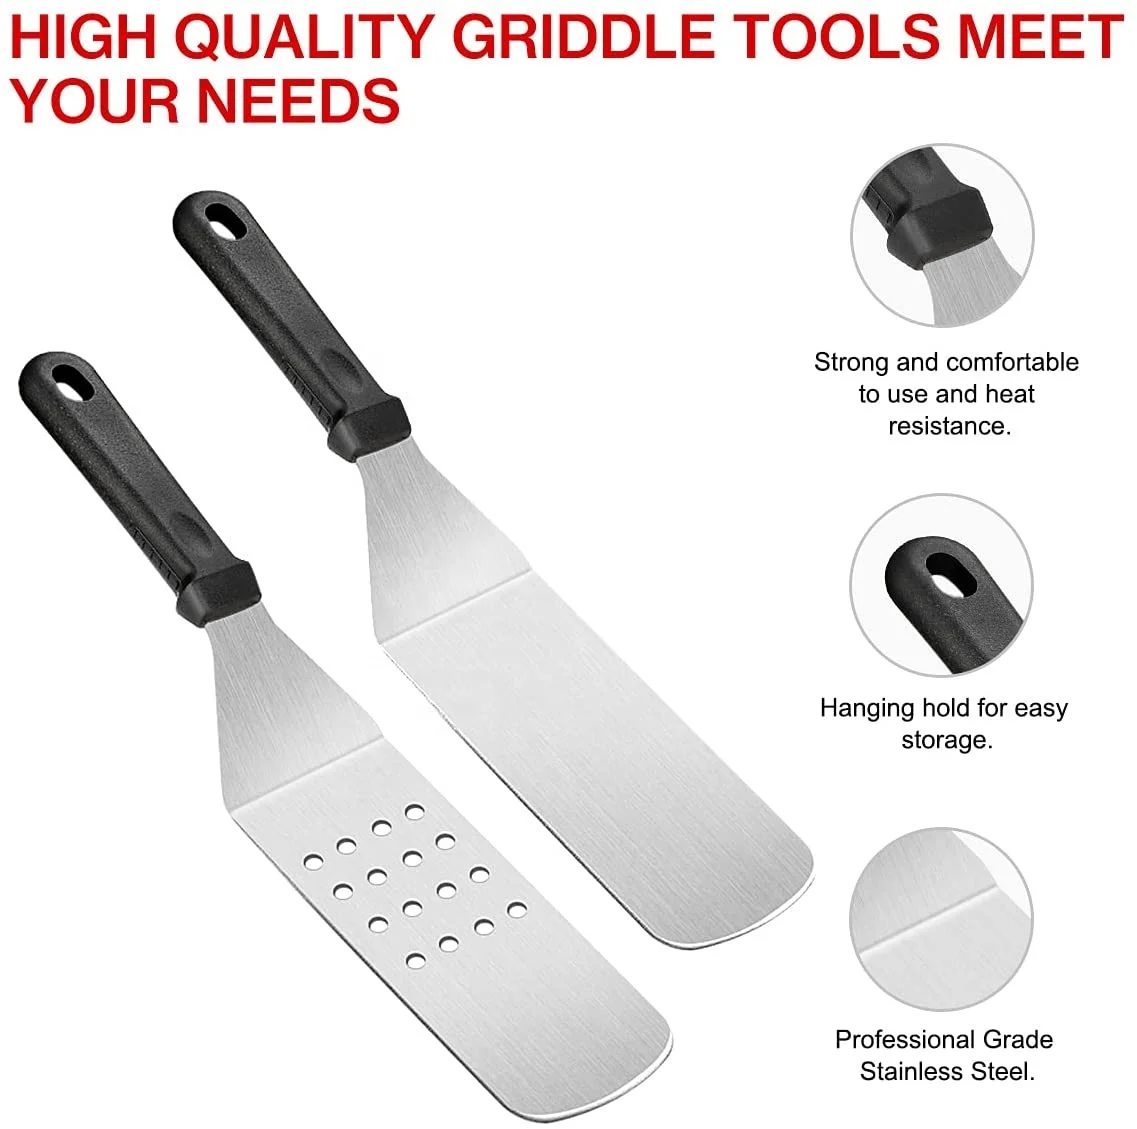 Griddle Accessories,15 Pcs Flat Top Grill Accessories kit for Blackstone  and Camp,Stainless Steel BBQ Accessories with Spatula, Basting